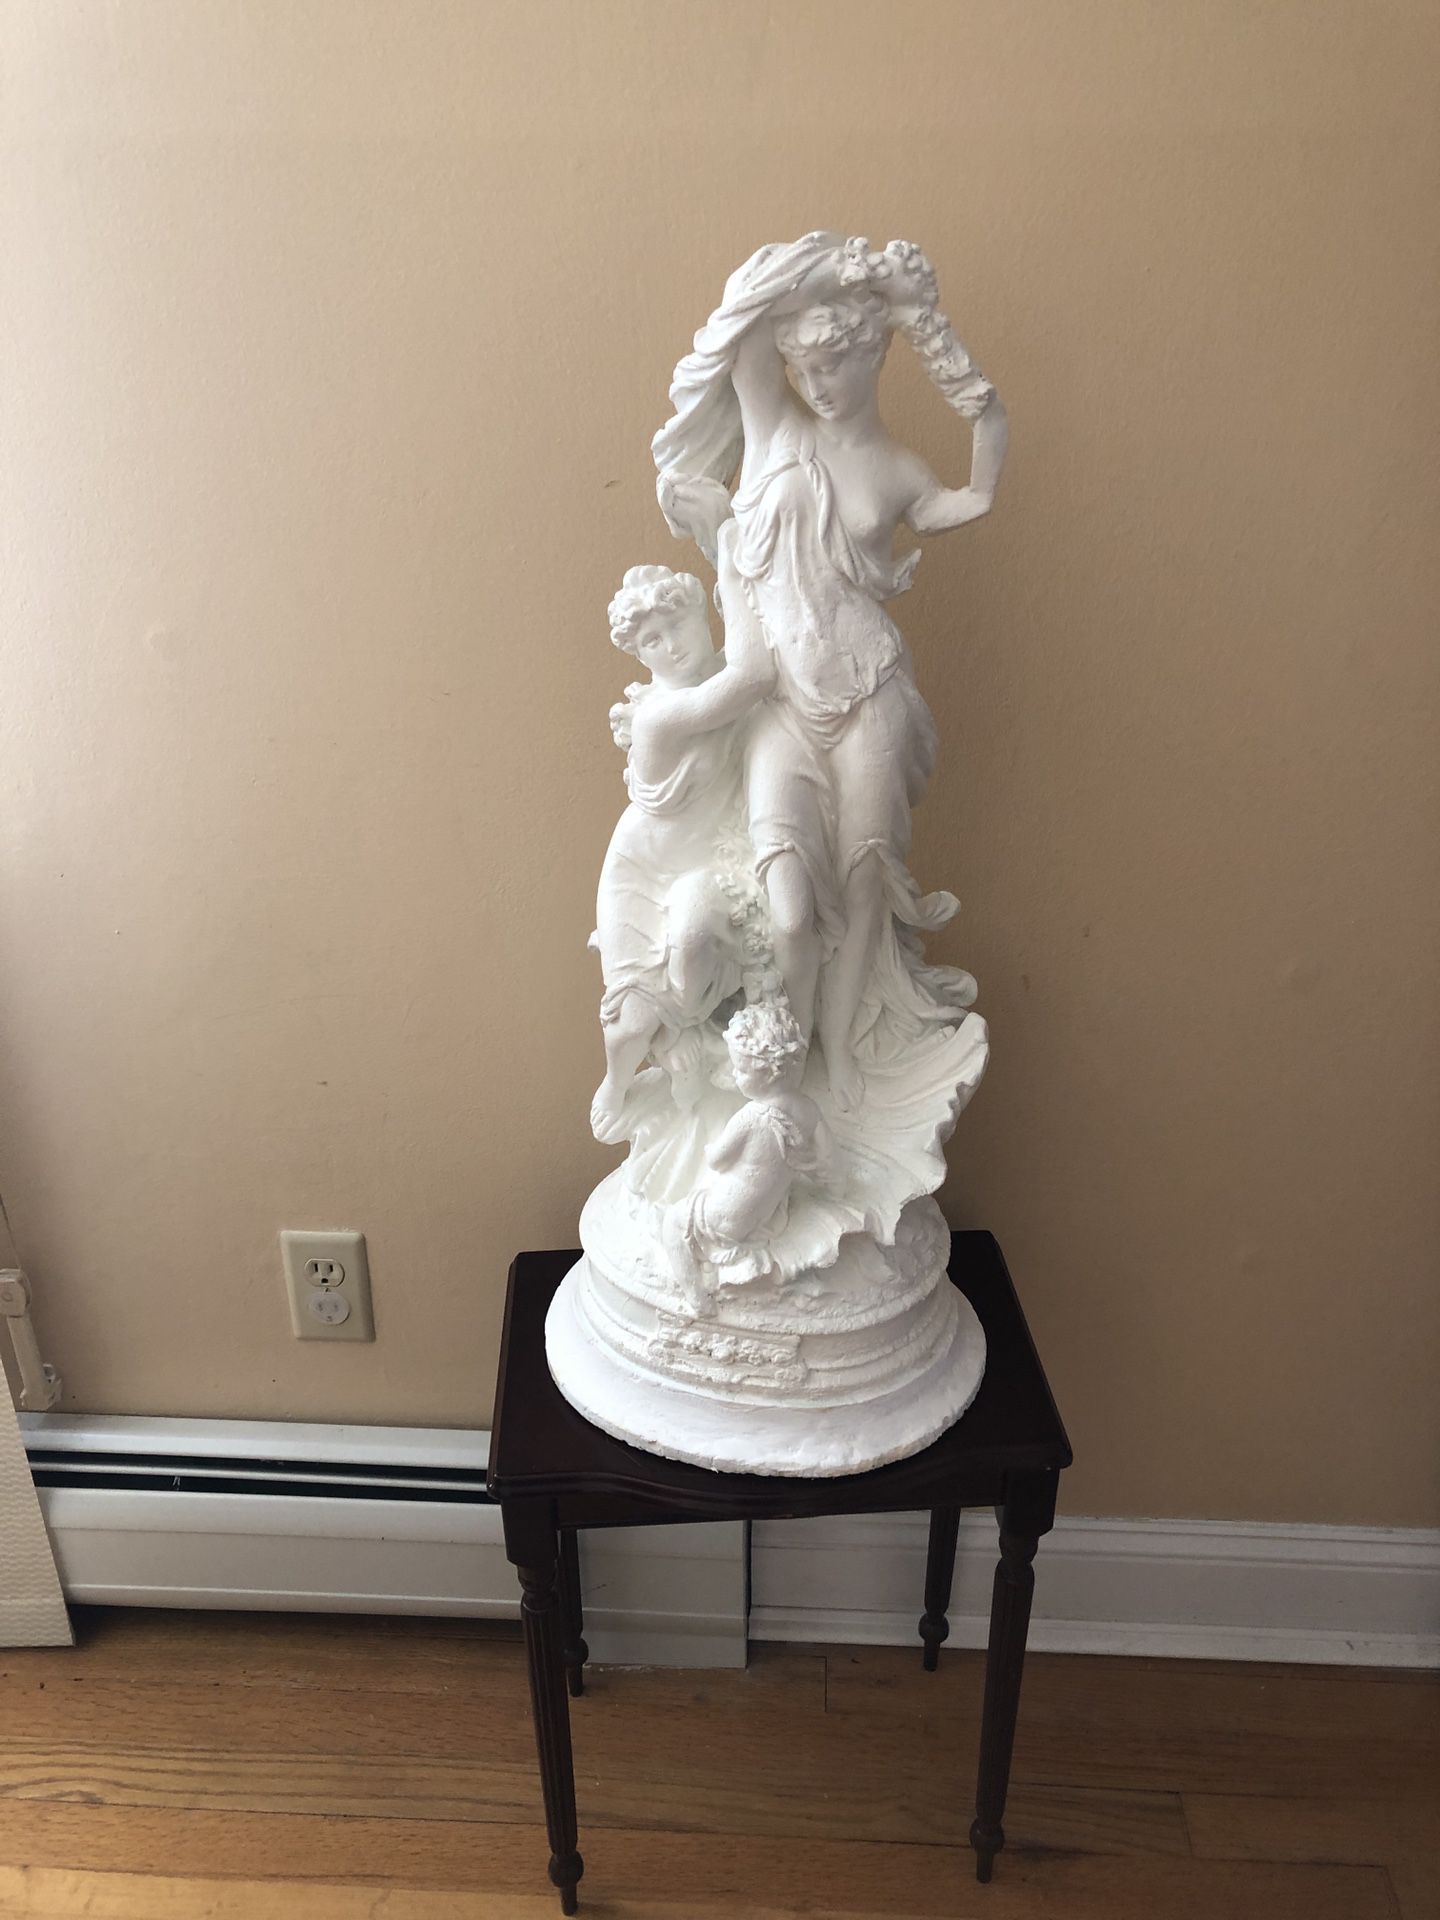 Vintage Sculpture Statue Figurine Classical Birth Of Venus 27” Tall And 16” Wide , There Is Marketing On The Back 